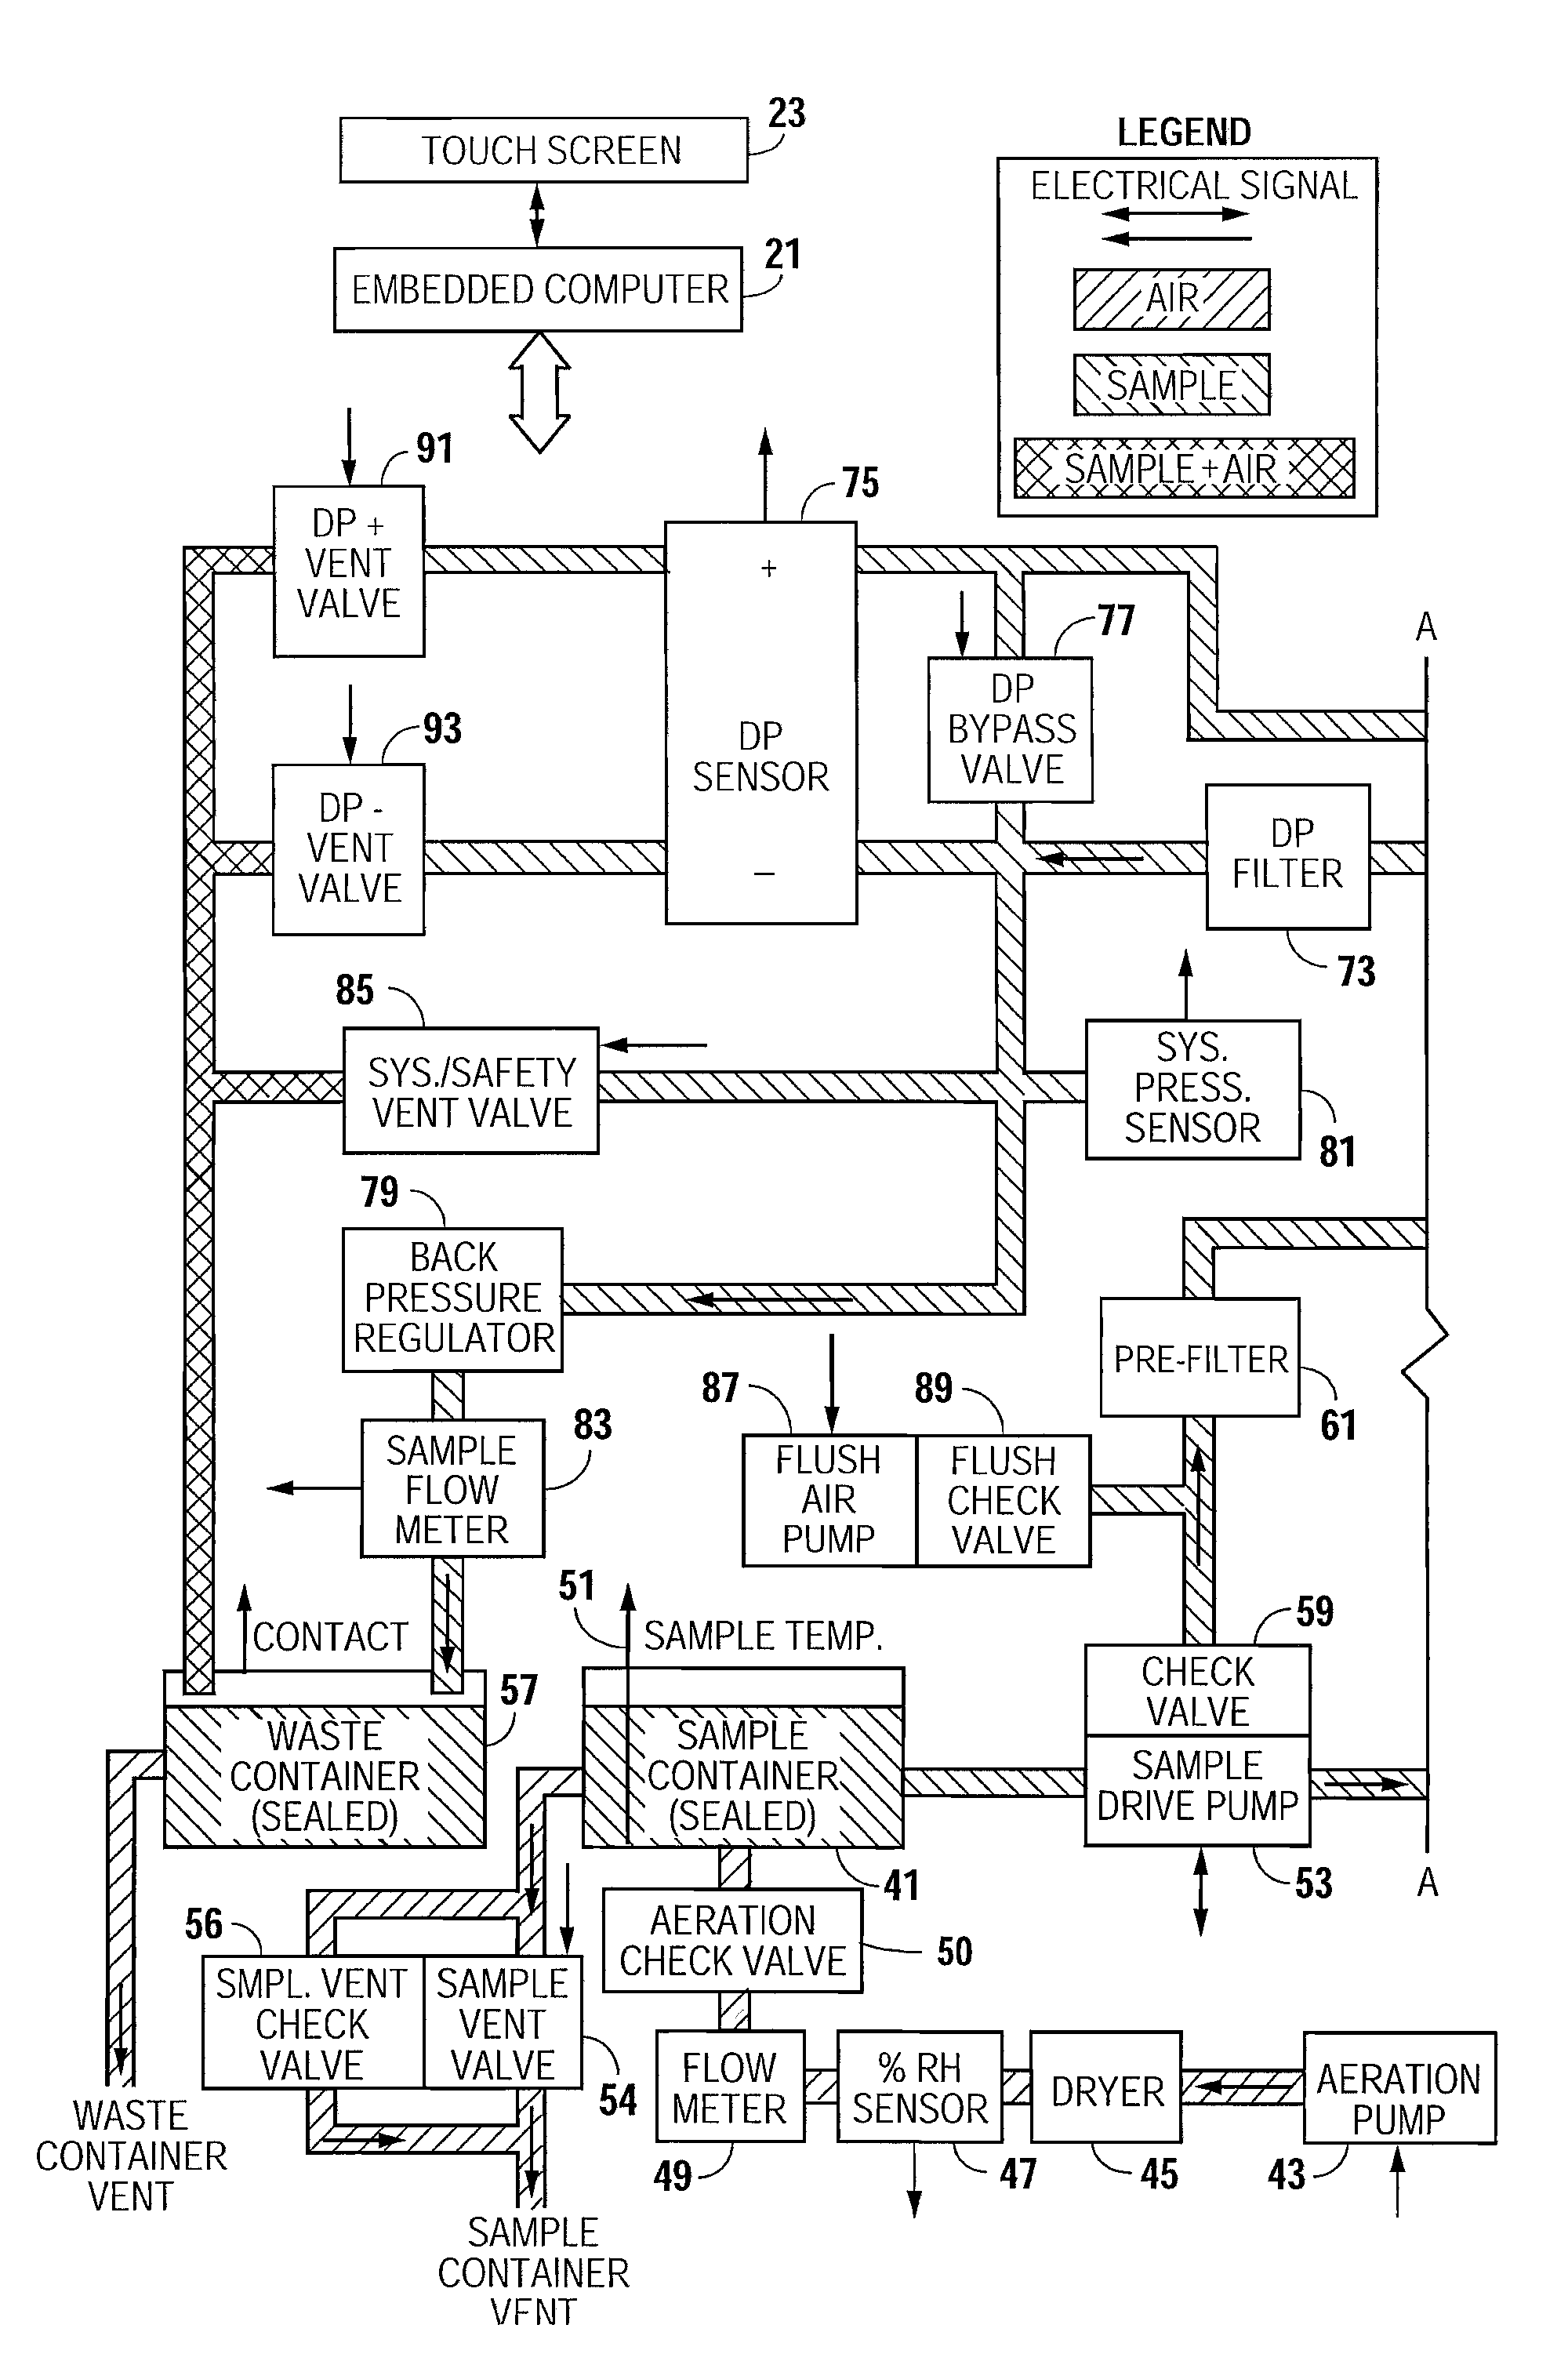 Auto Priming and Flushing an Apparatus for Determining the Thermal Stability of Fluids